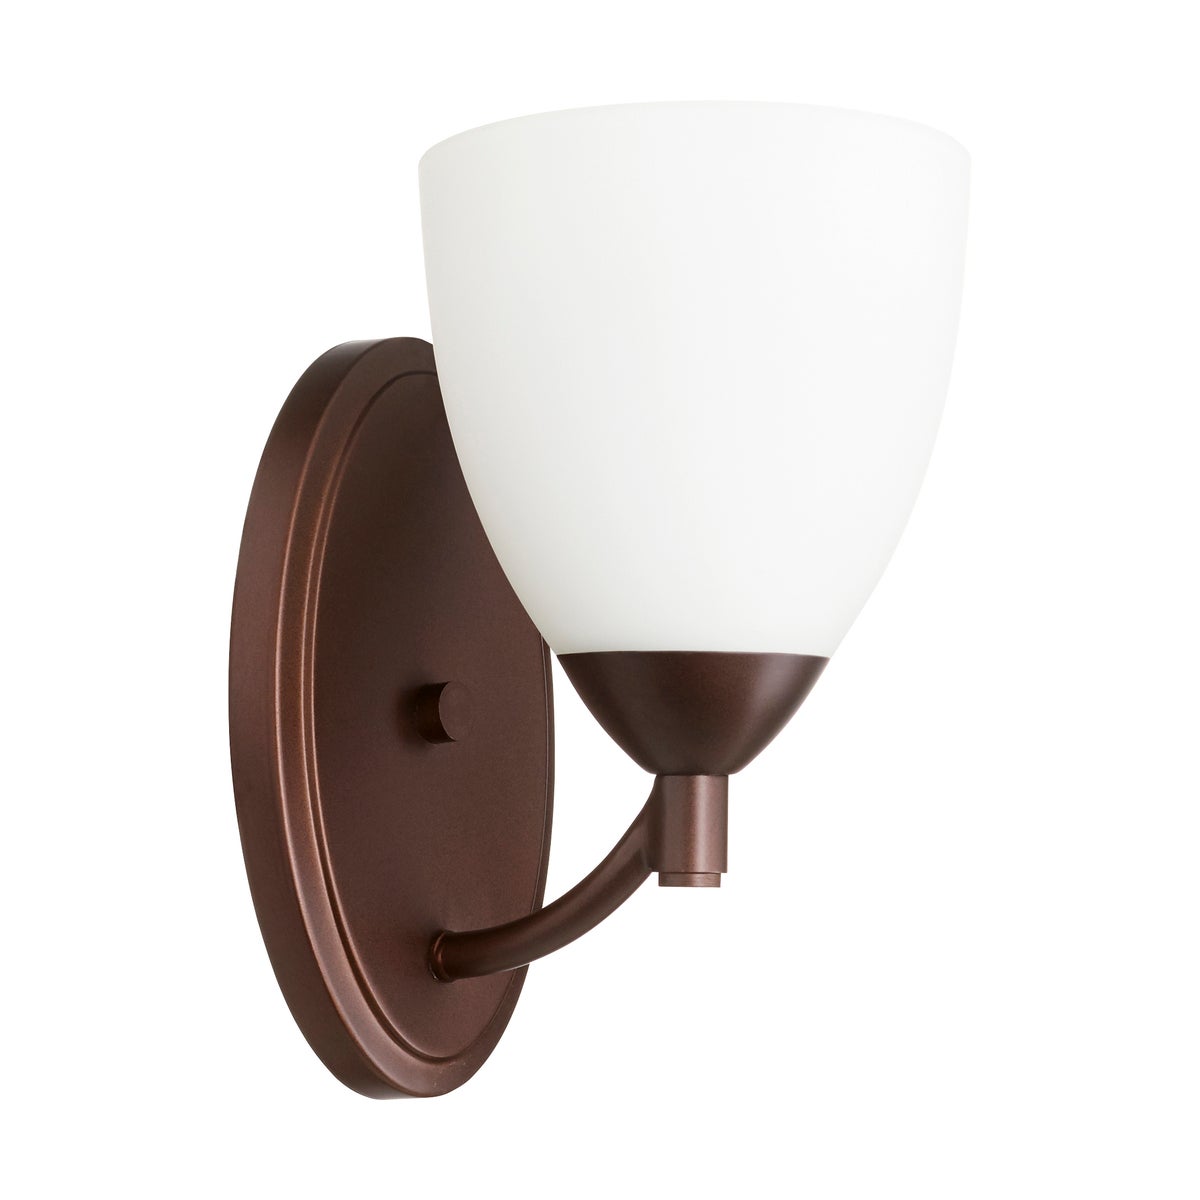 Barkley 1 Light Traditional Oiled Bronze Wall Sconce